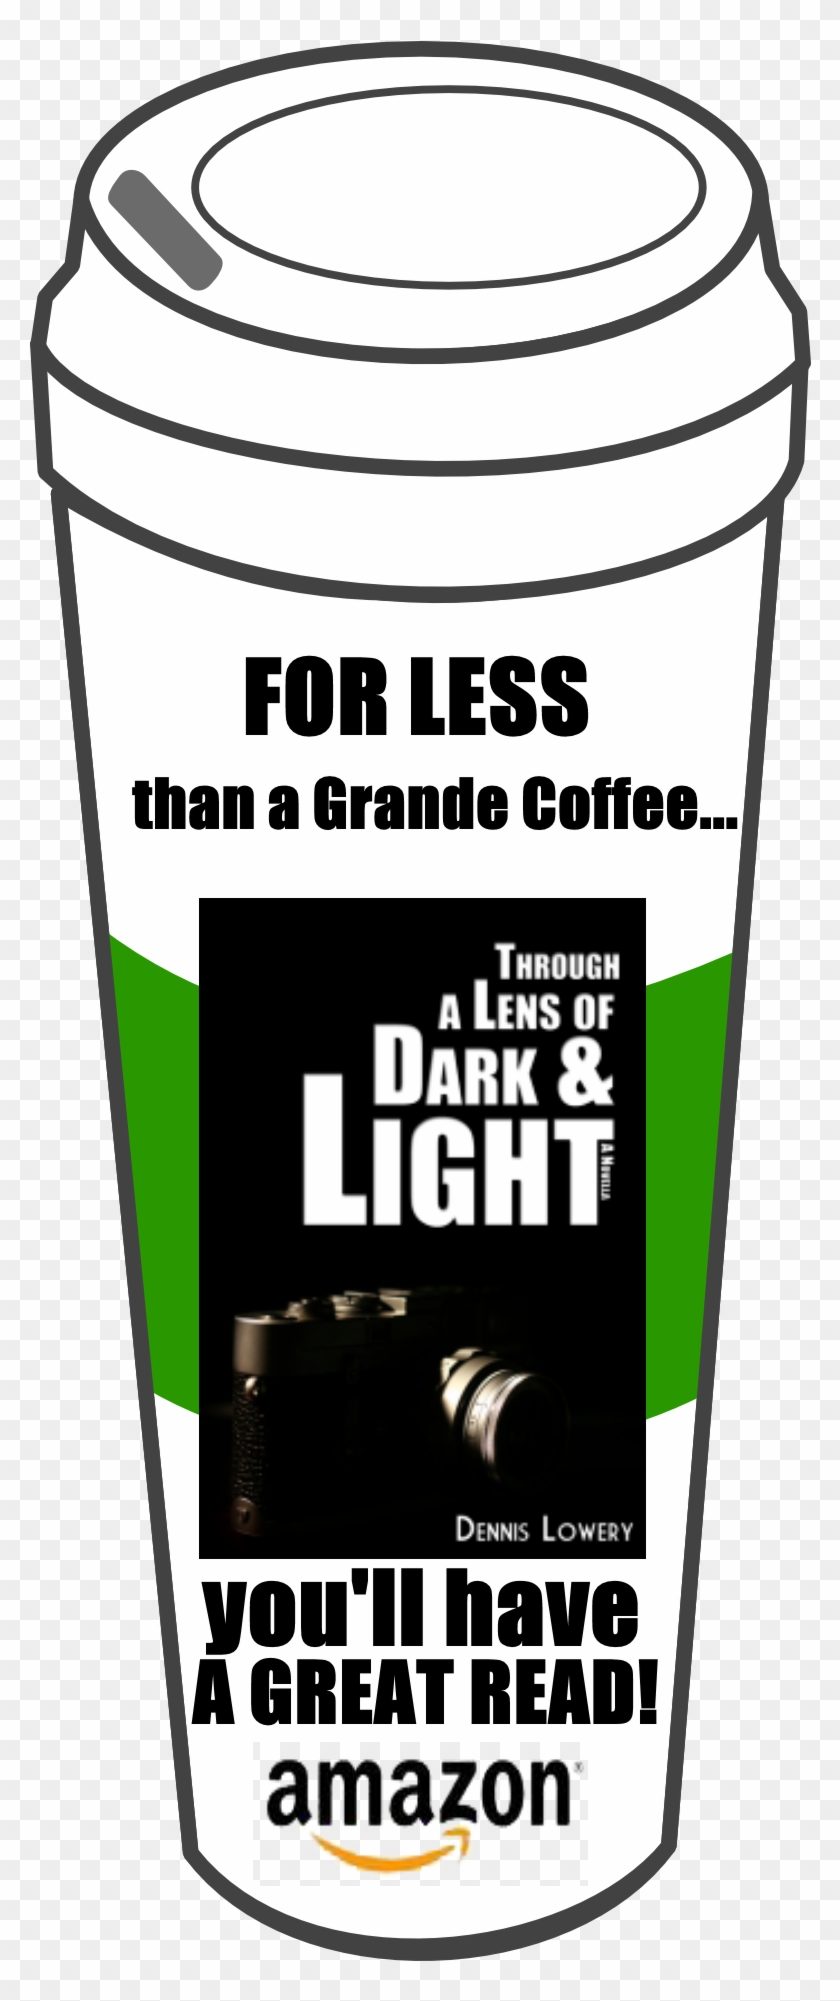 For Less Than A Grande Coffee You'll Have A Great Read - Two Tales Of Dark & Light [book] #943221